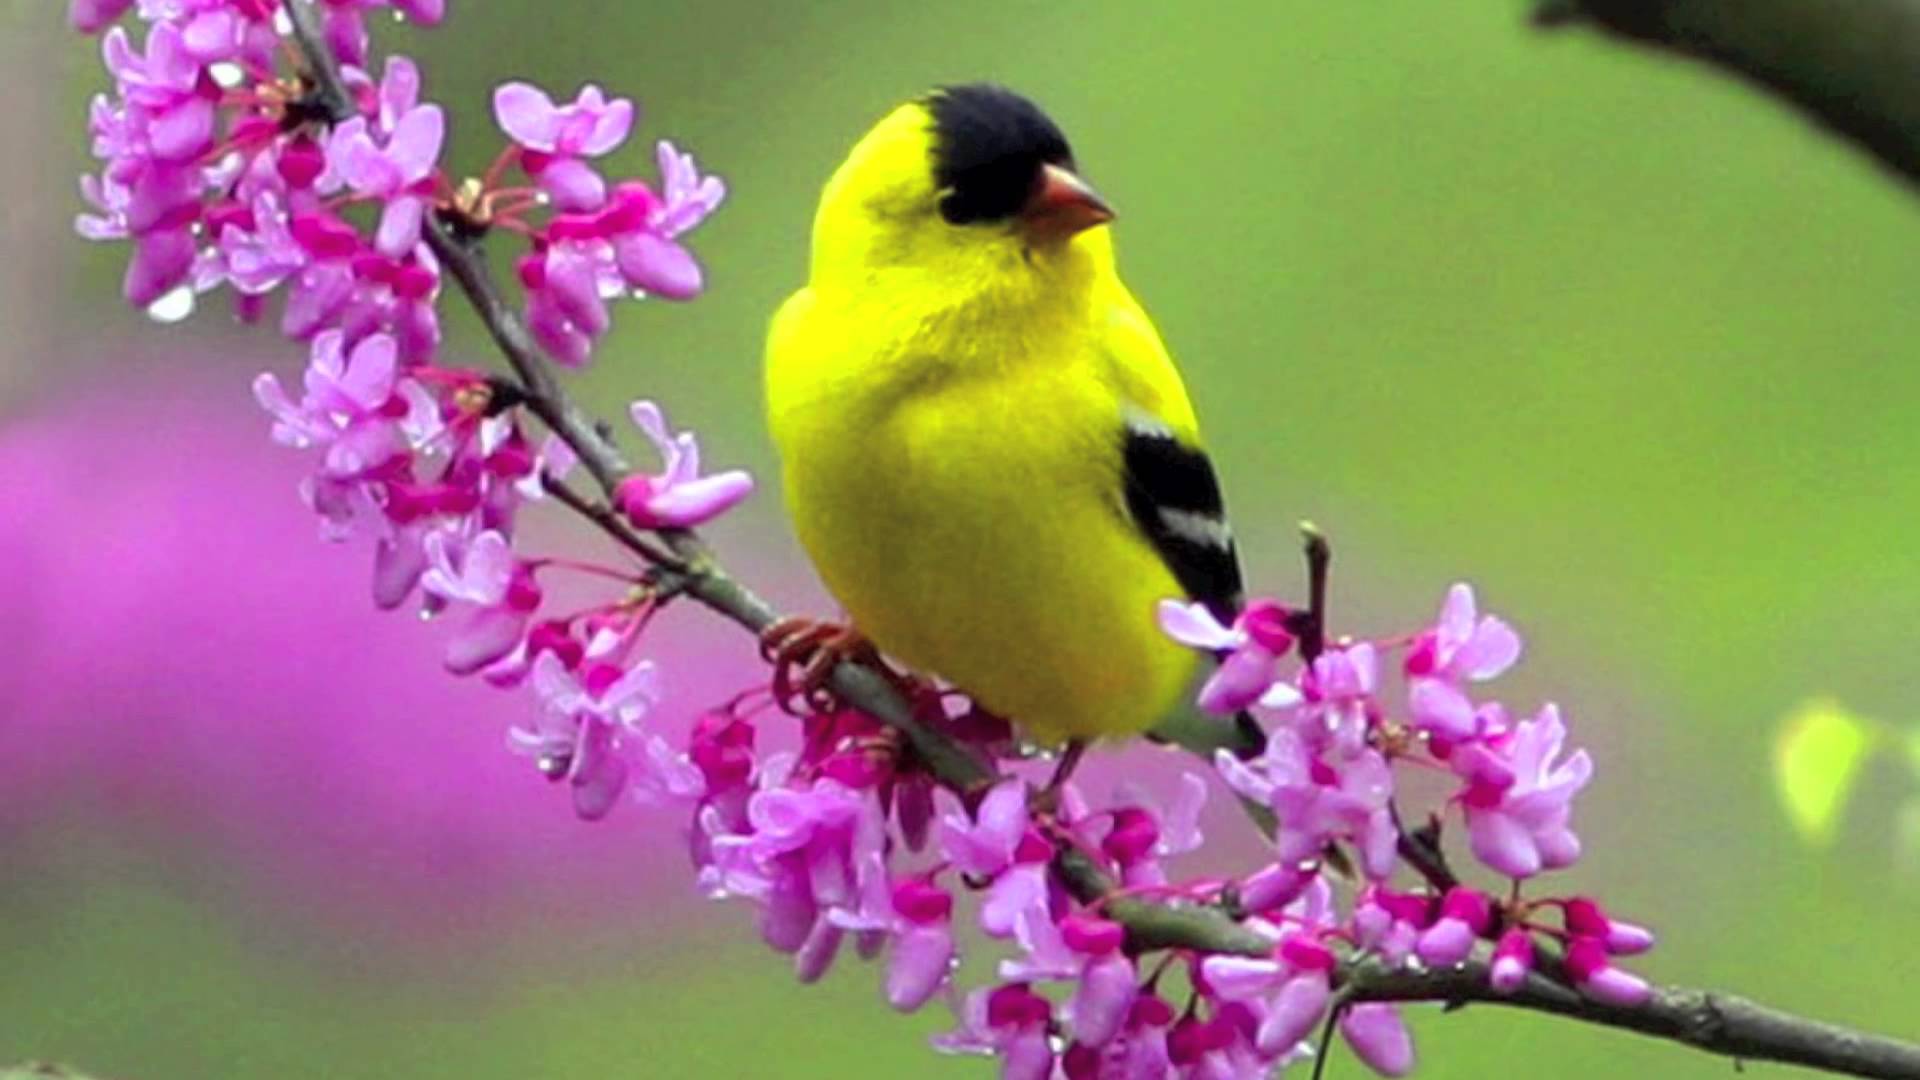 birds and flowers wallpaper which is under the birds wallpapers